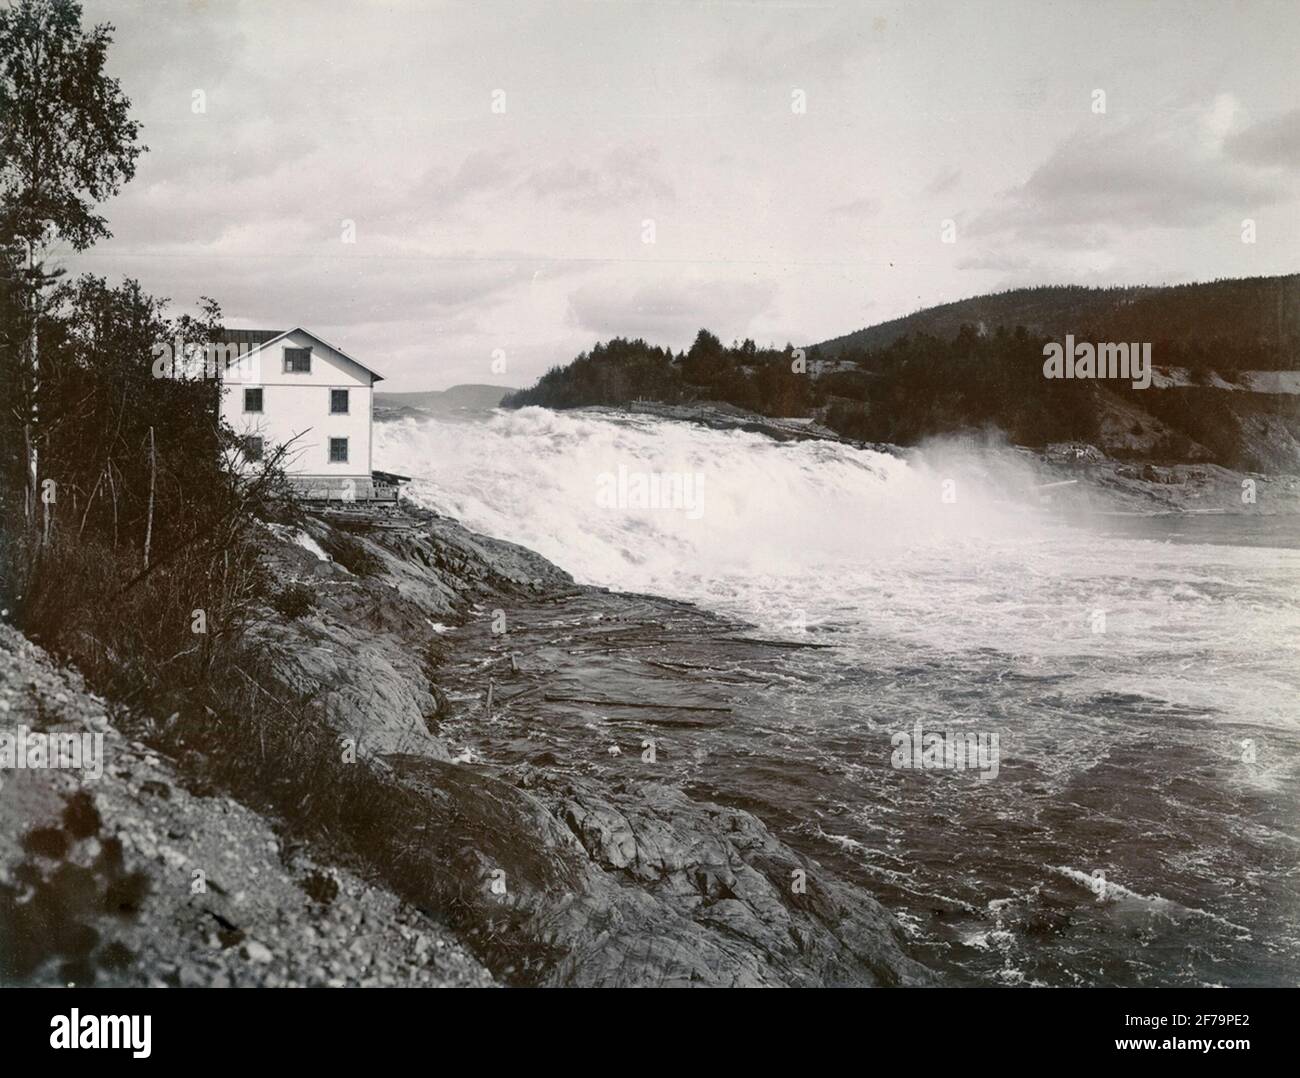 Hammarforsen, Ragunda. Indalsälven. Picture from the magazine home's image material. Stock Photo